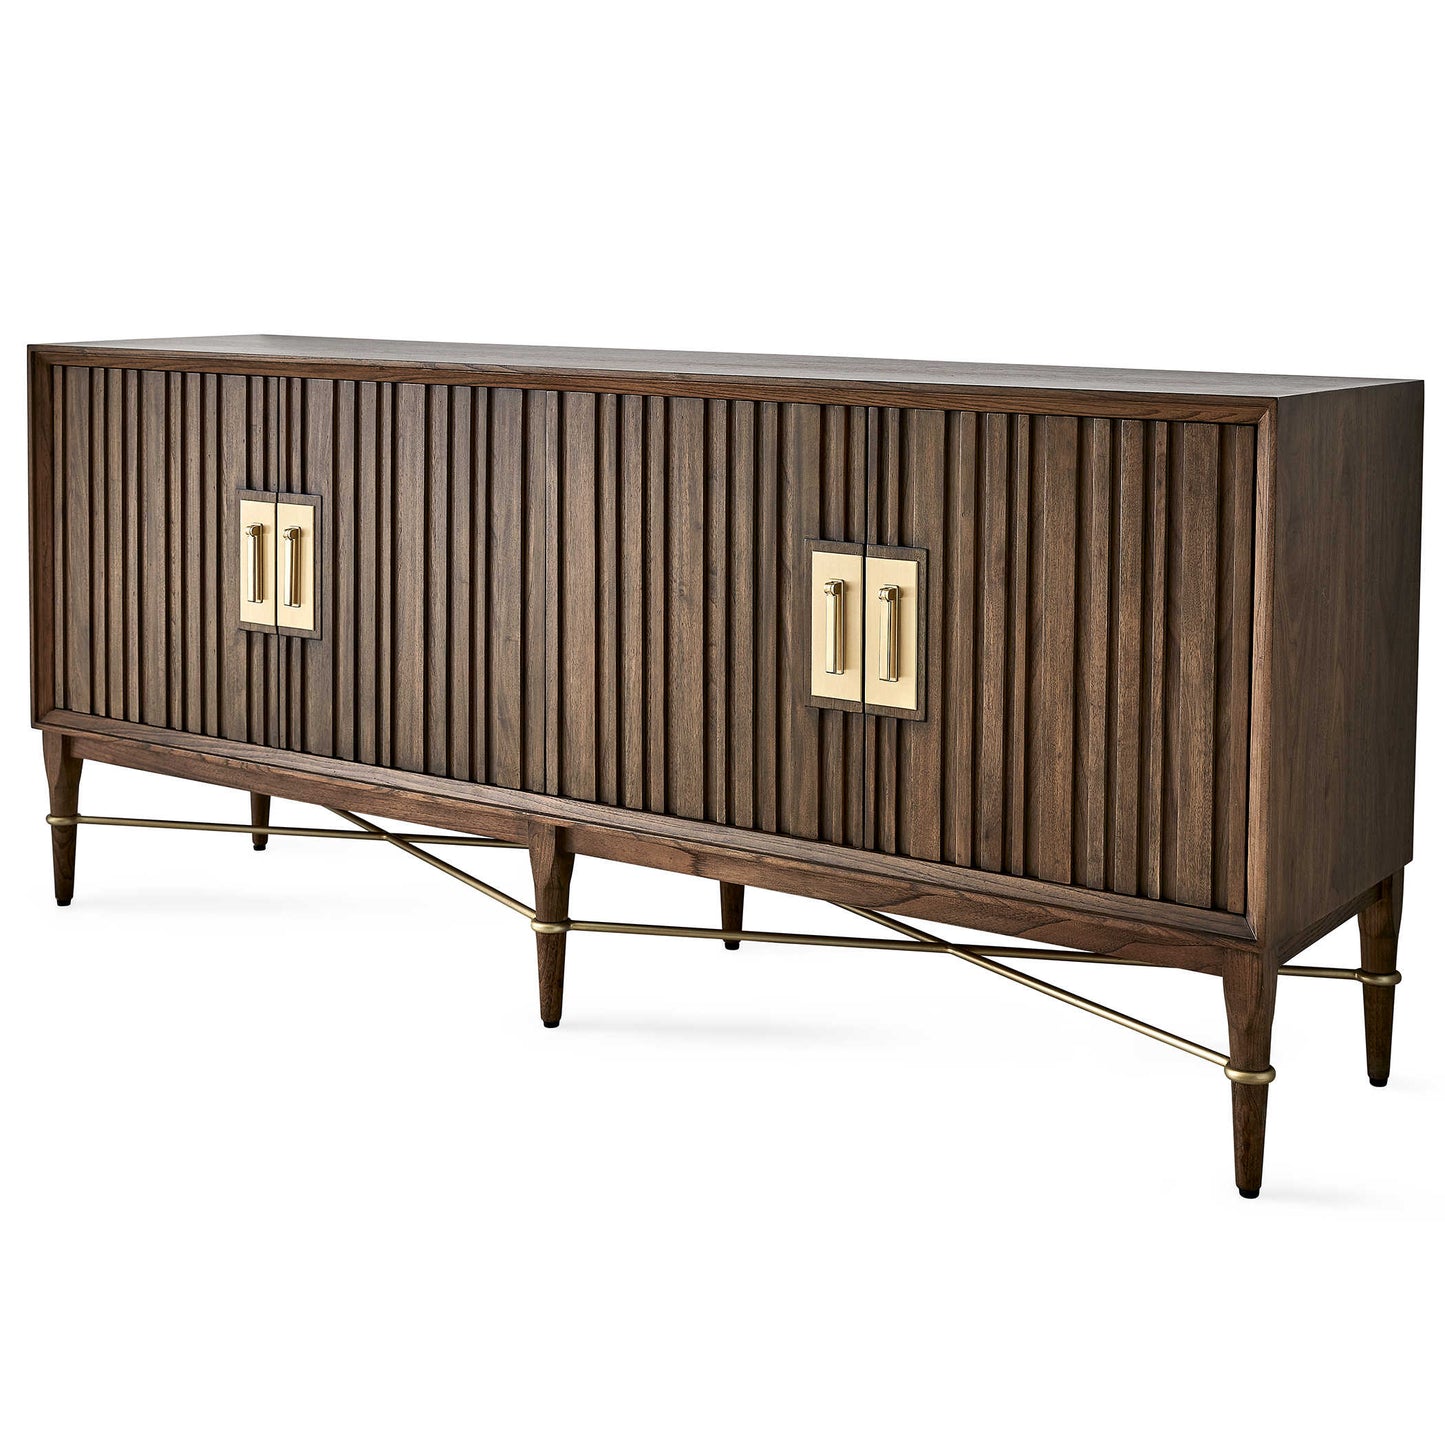 Annabelle 4 Door Console with Solid Brass Handles, Rich Brown